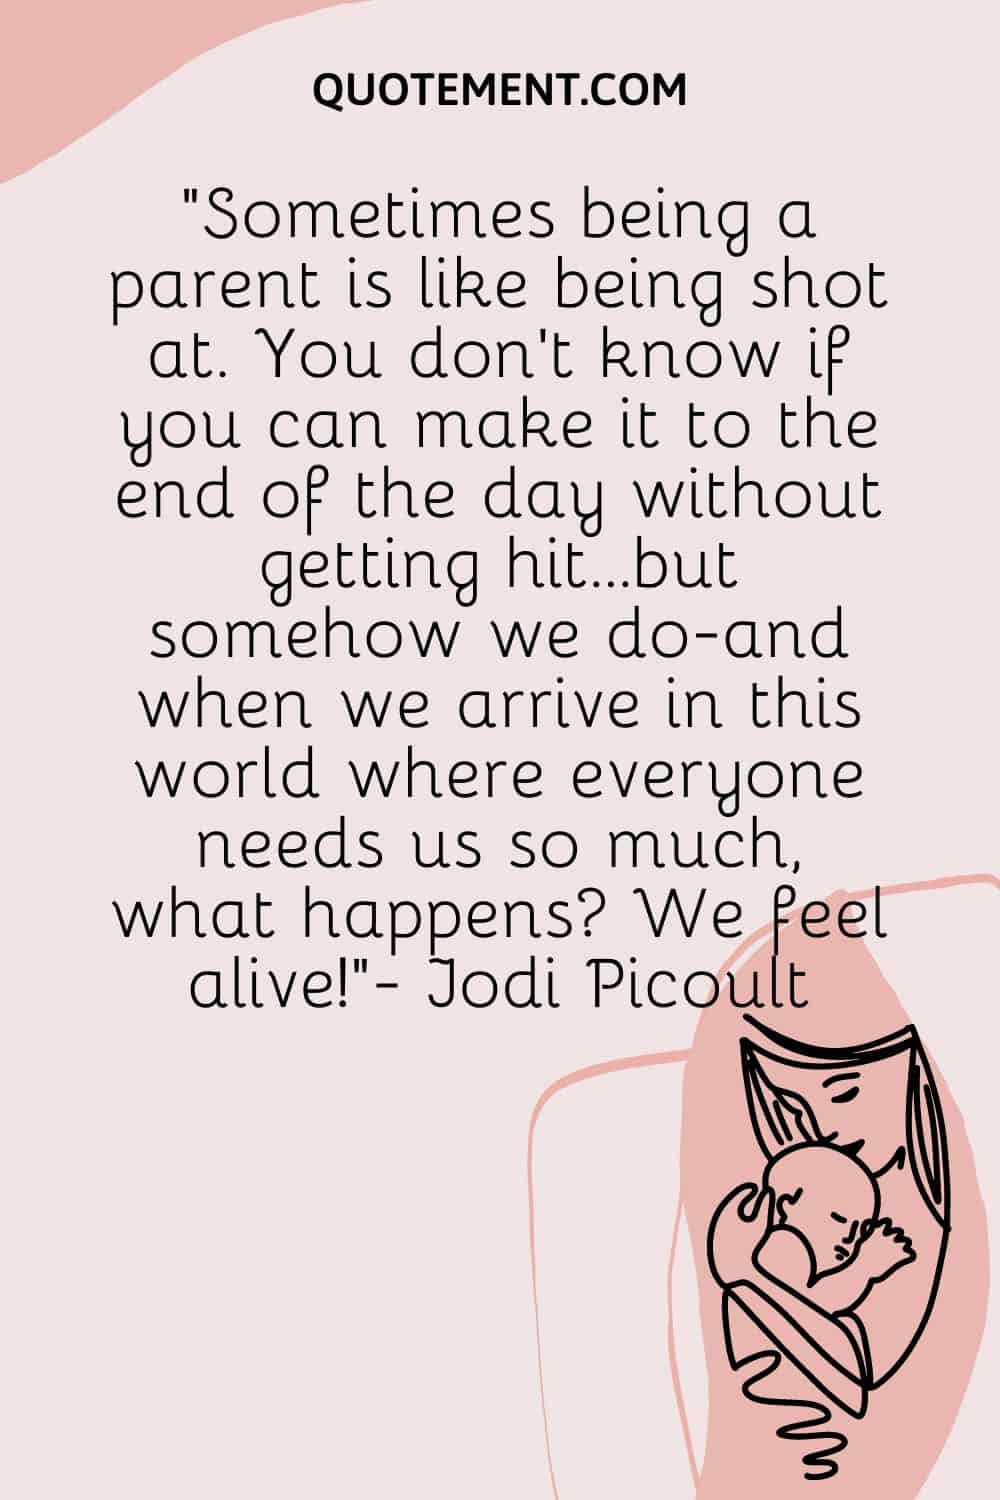 Sometimes being a parent is like being shot at.